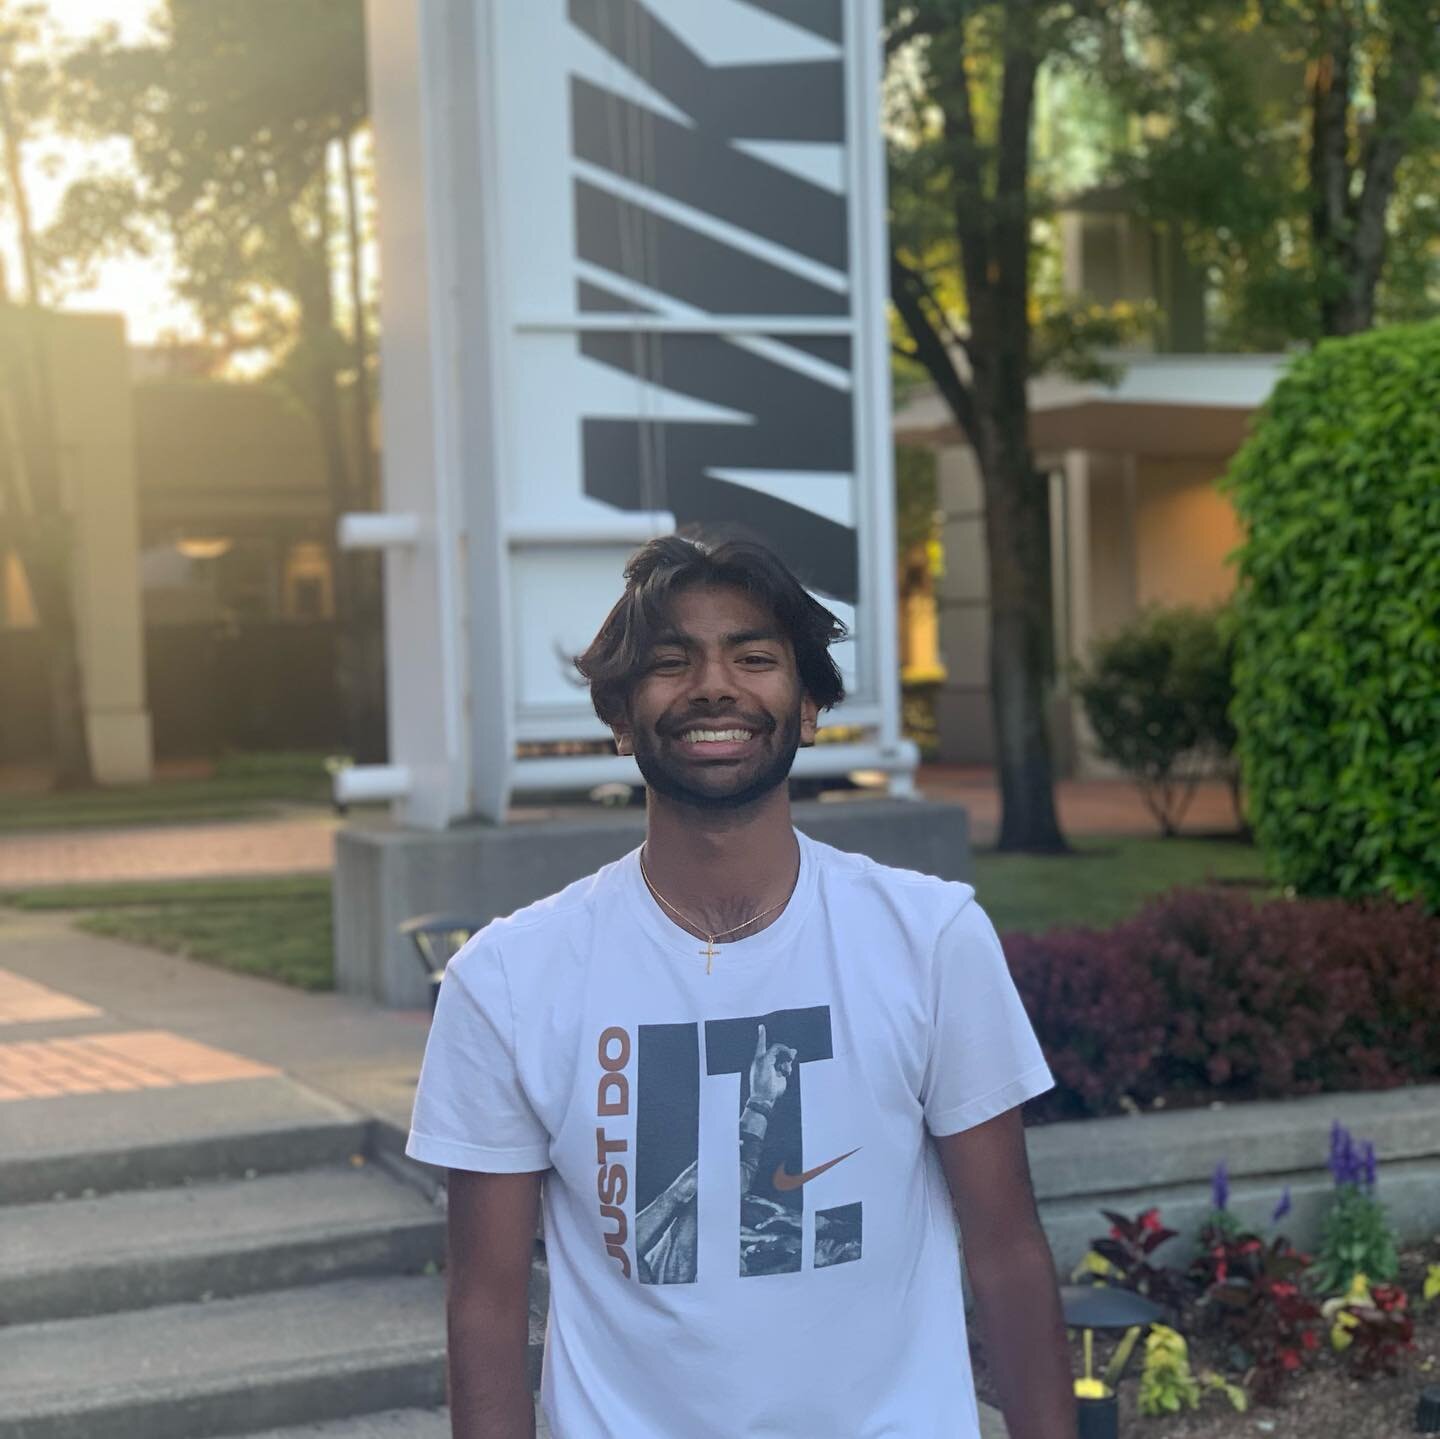 We would like to take the time to give a huge member spotlight to the one and only, Josh Kuriakose!

Josh has been with us for 4 and a half years and has had a huge impact on Paradigm. In March, Josh will be working at Nike full-time and we&rsquo;re 